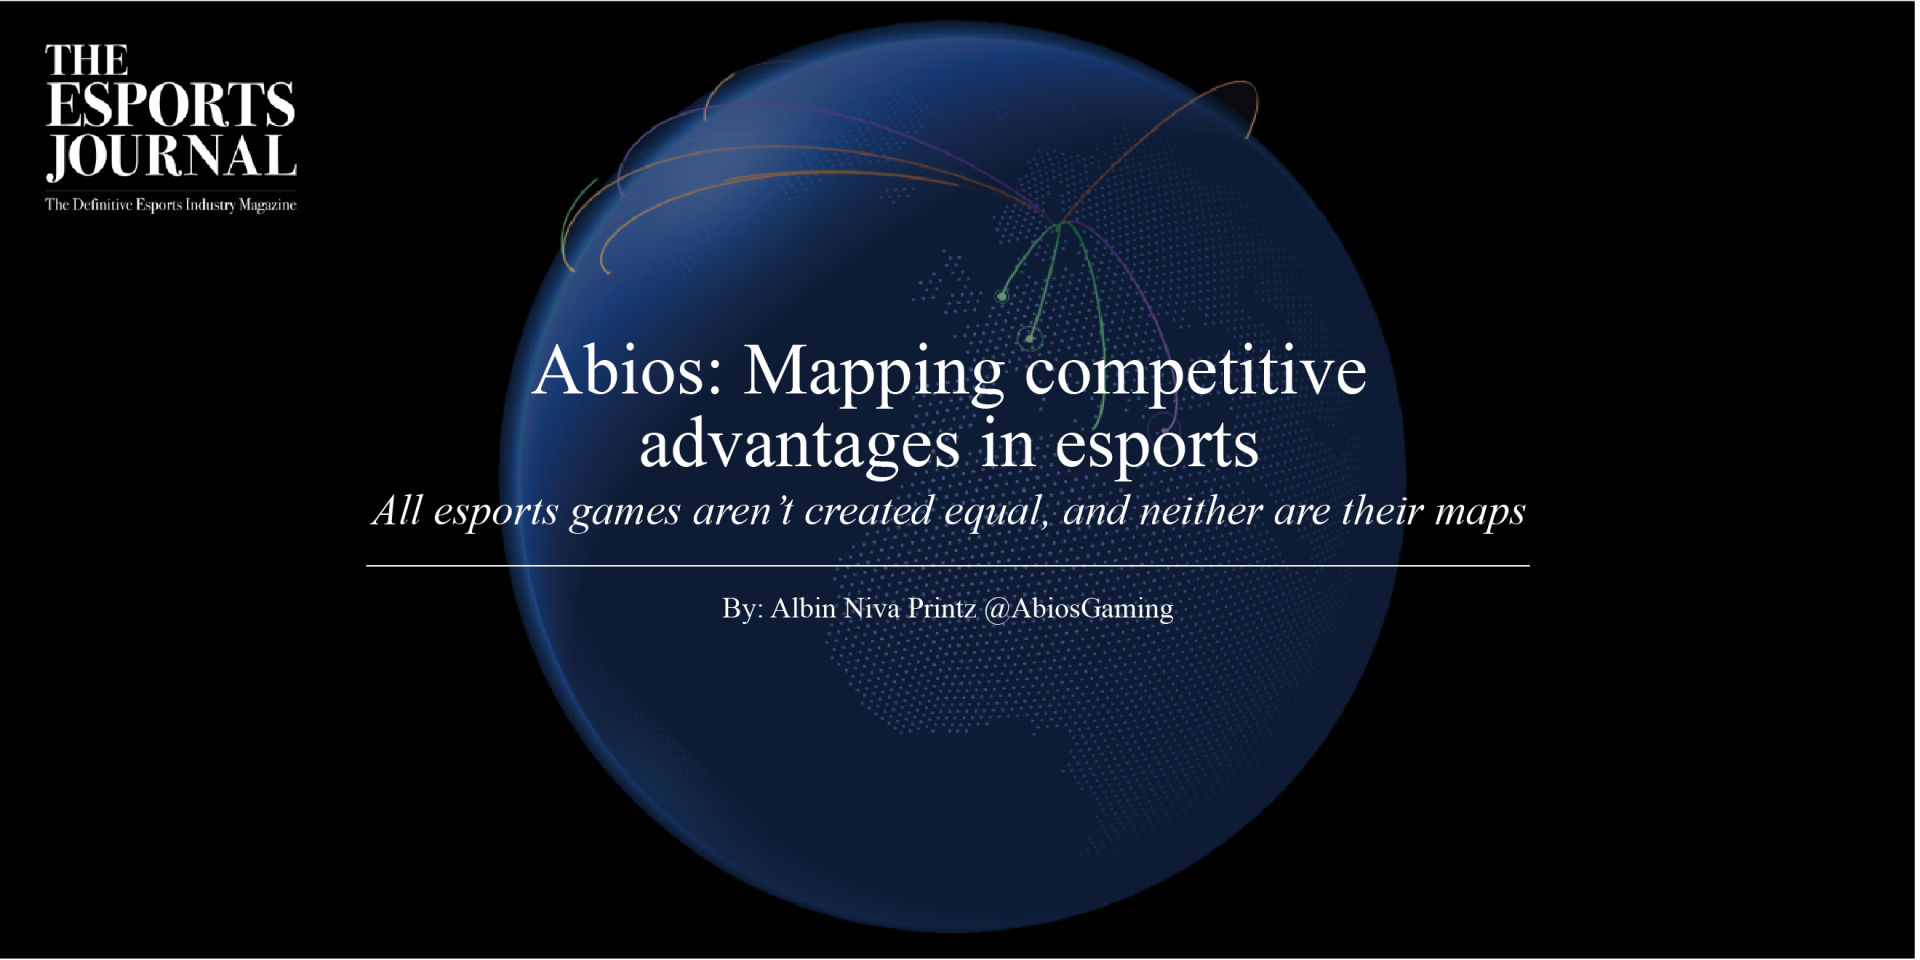 Abios: Mapping competitive advantages in esports